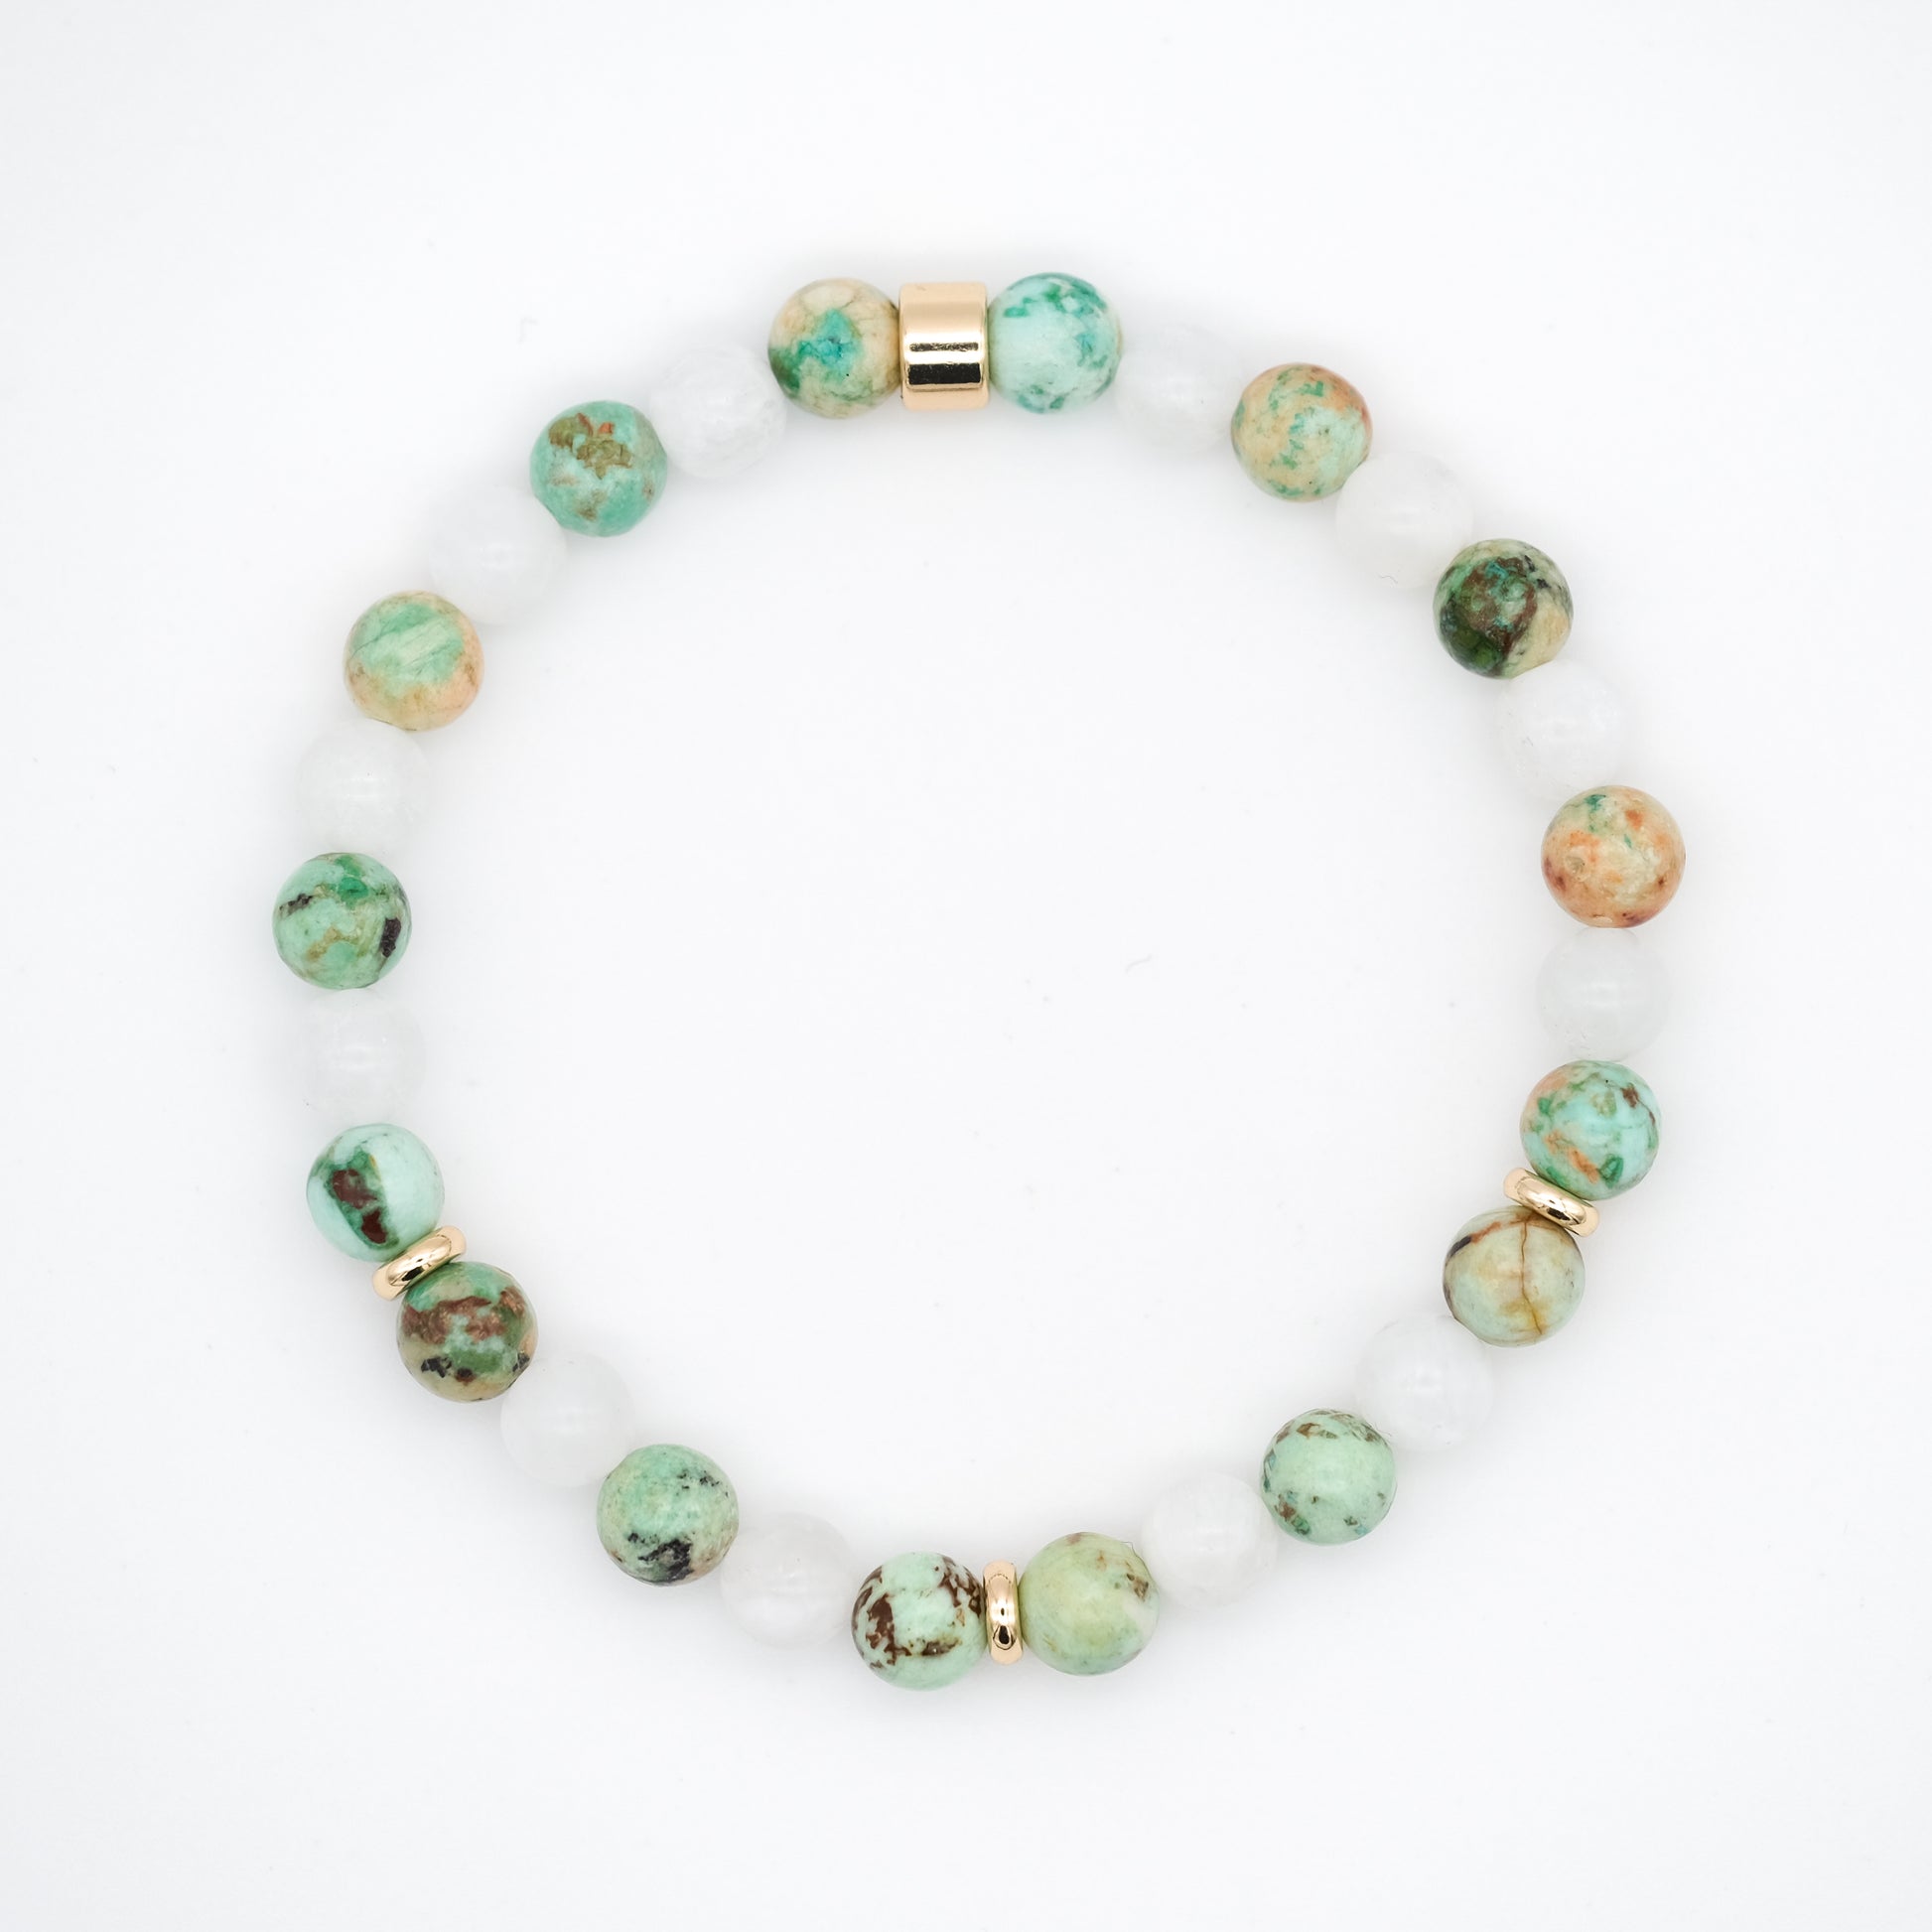 A moonstone and chrysocolla gemstone bracelet in 6mm beads with gold accessories from above